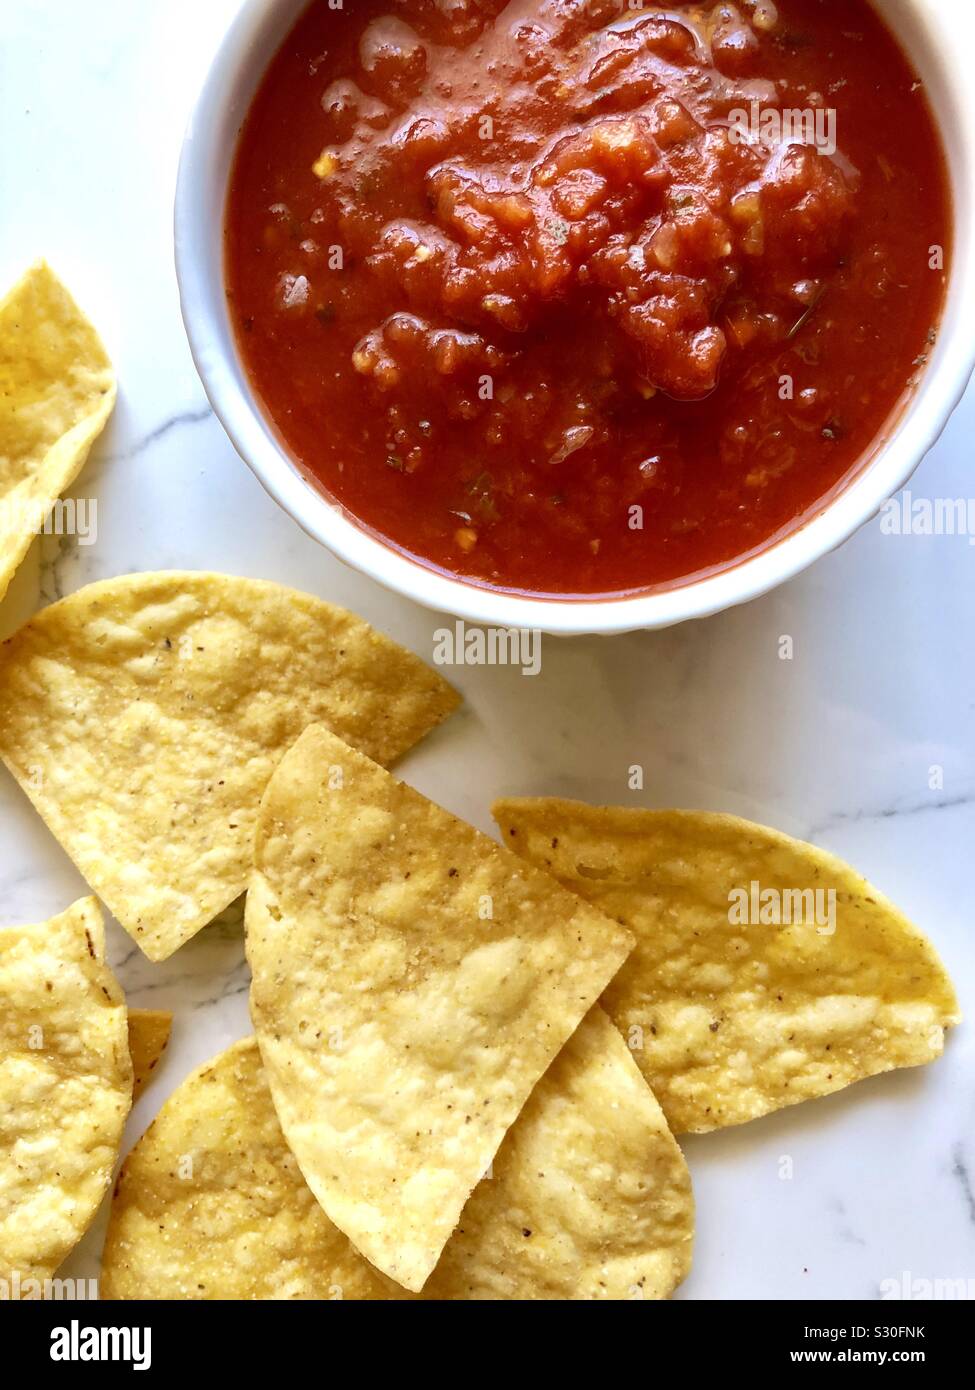 Chips and salsa Stock Photo